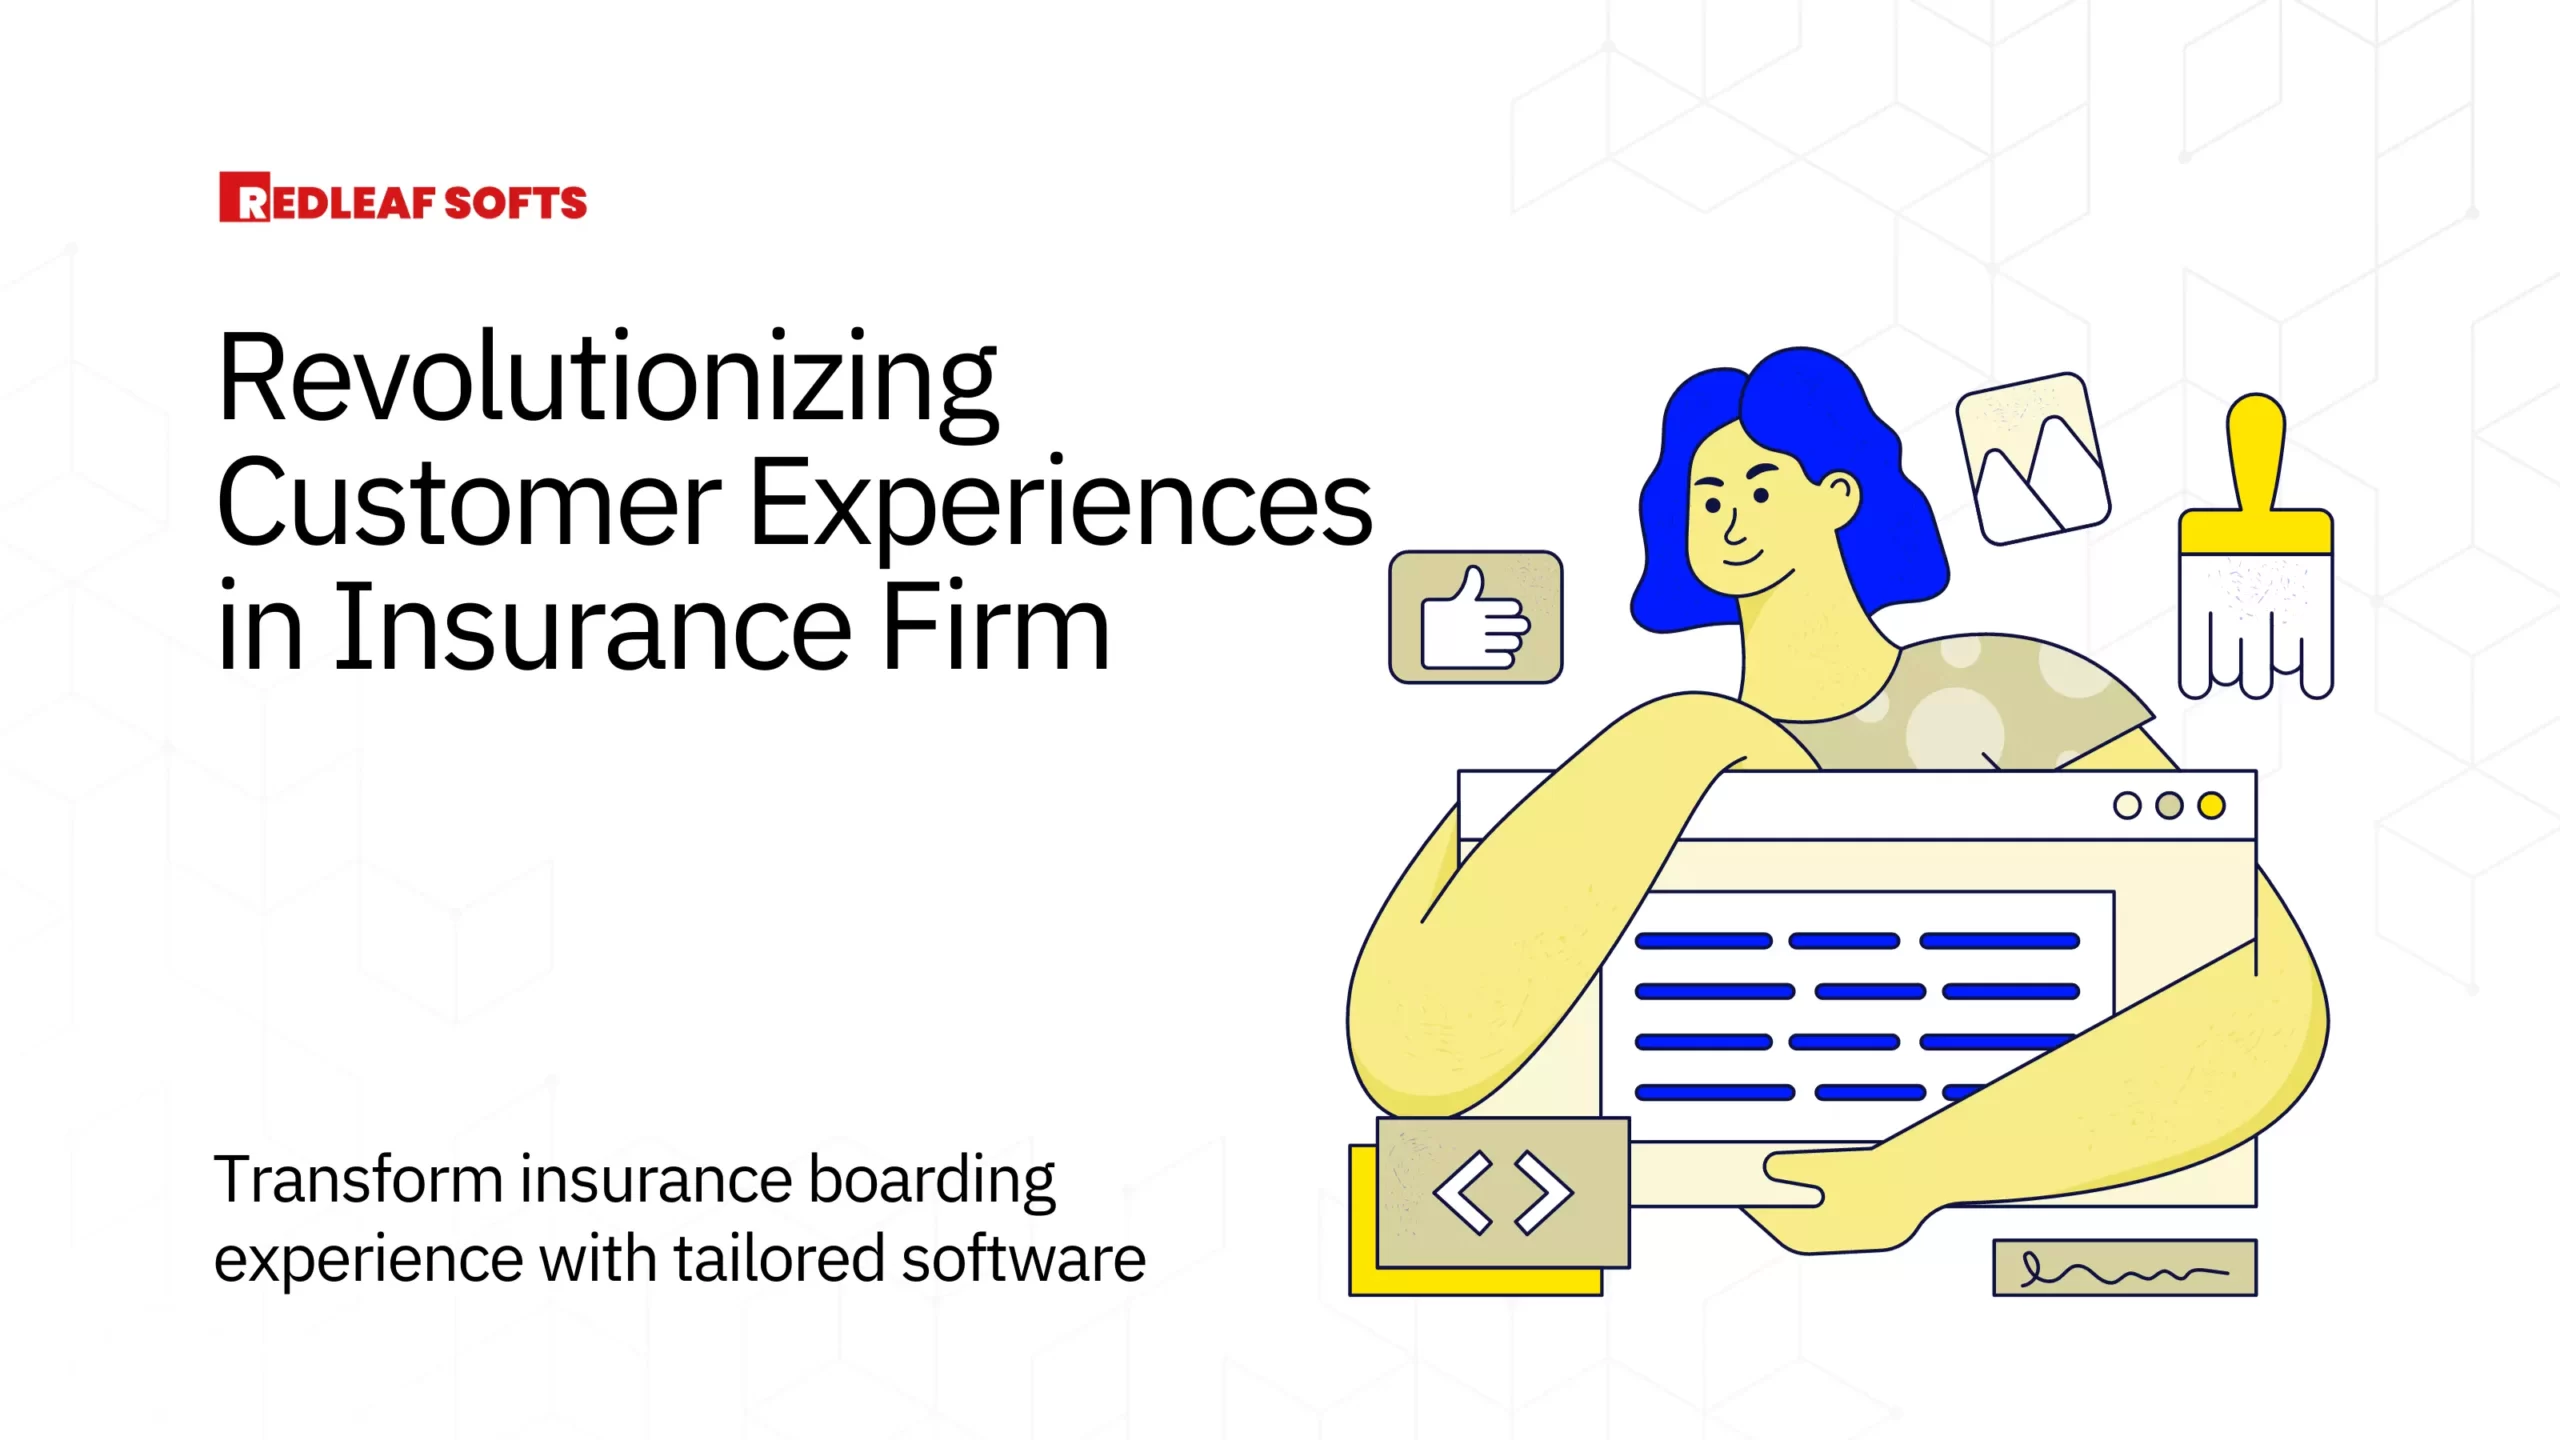 Revolutionizing Customer Experiences in Insurance Firm